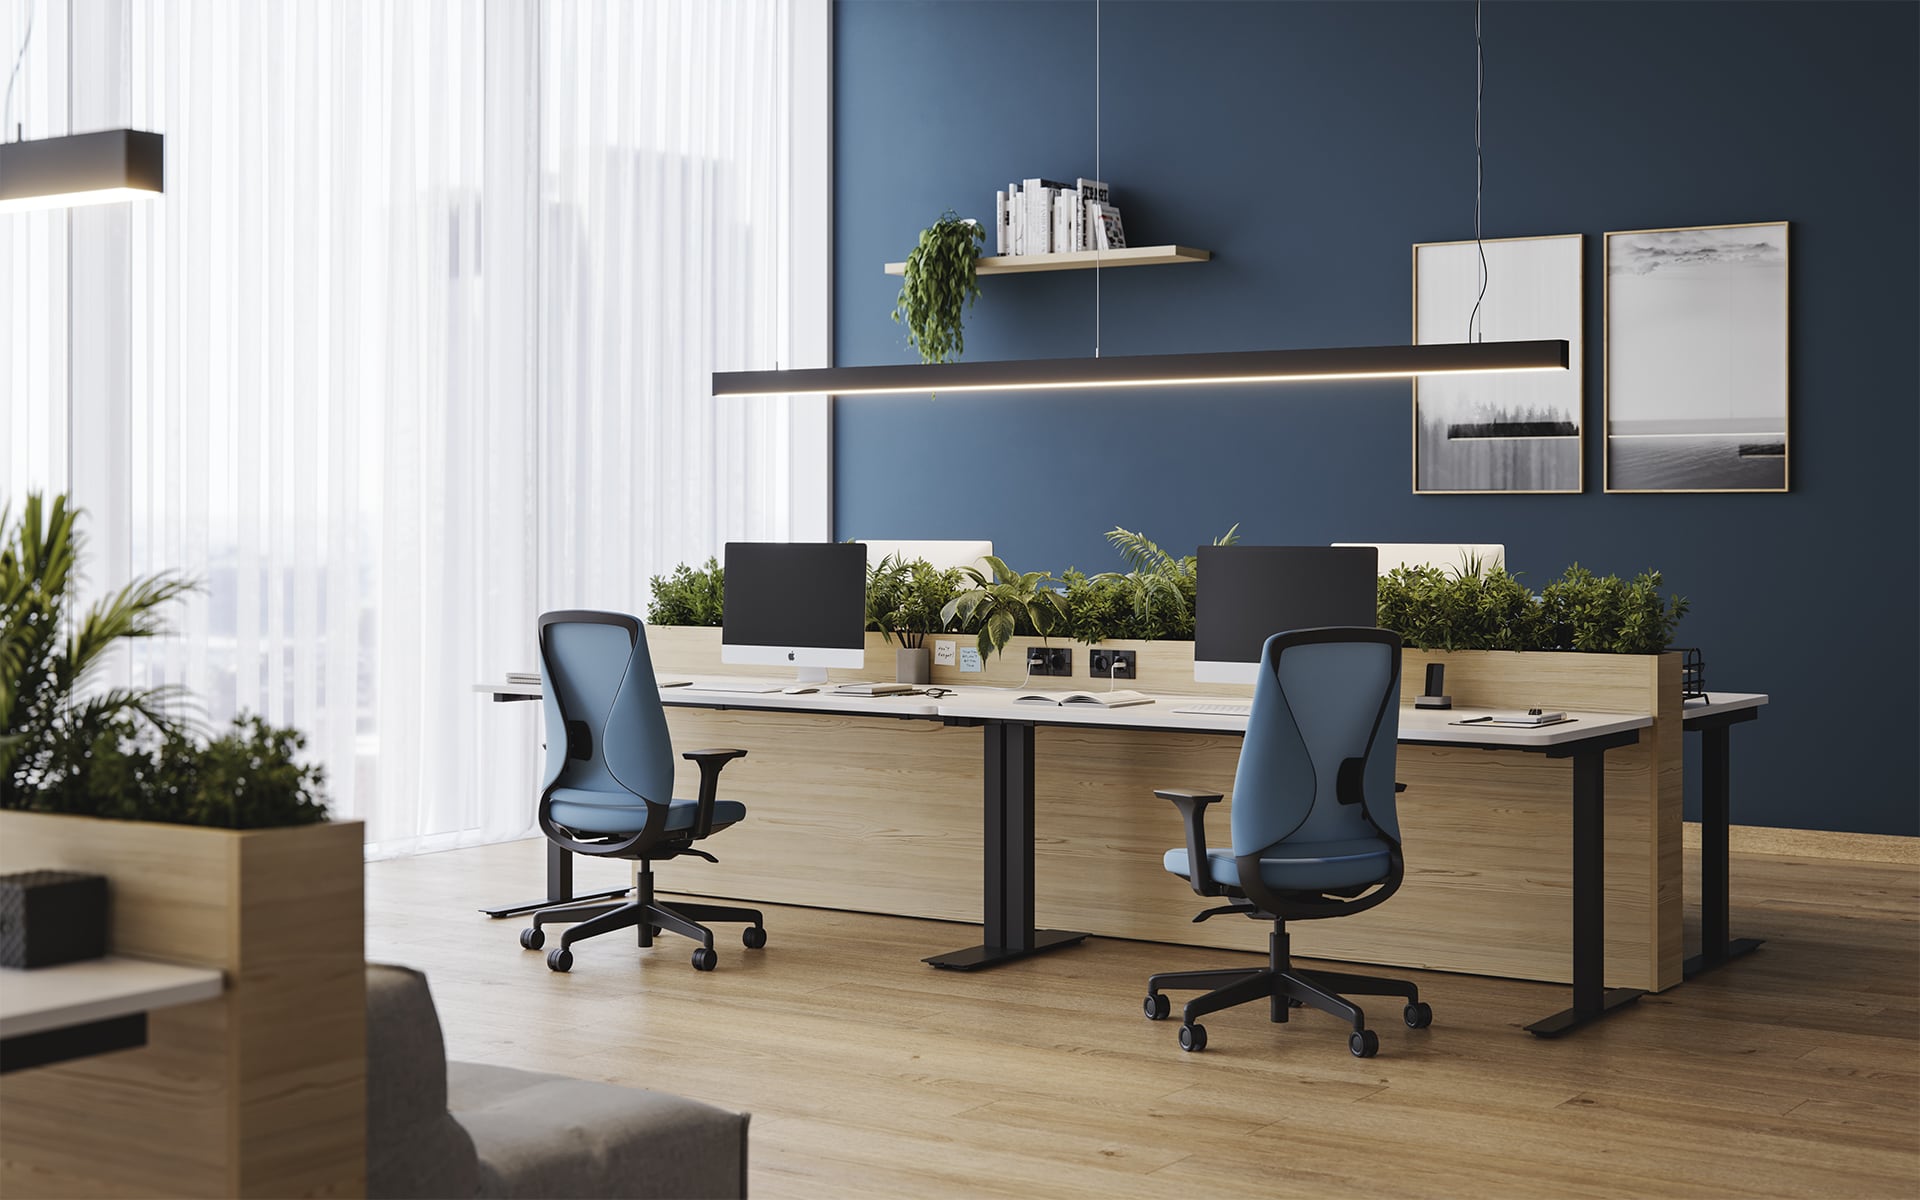 Two Comfordy Silhouette Office chairs by ITO Design with light blue upholstery in modern office with many plants